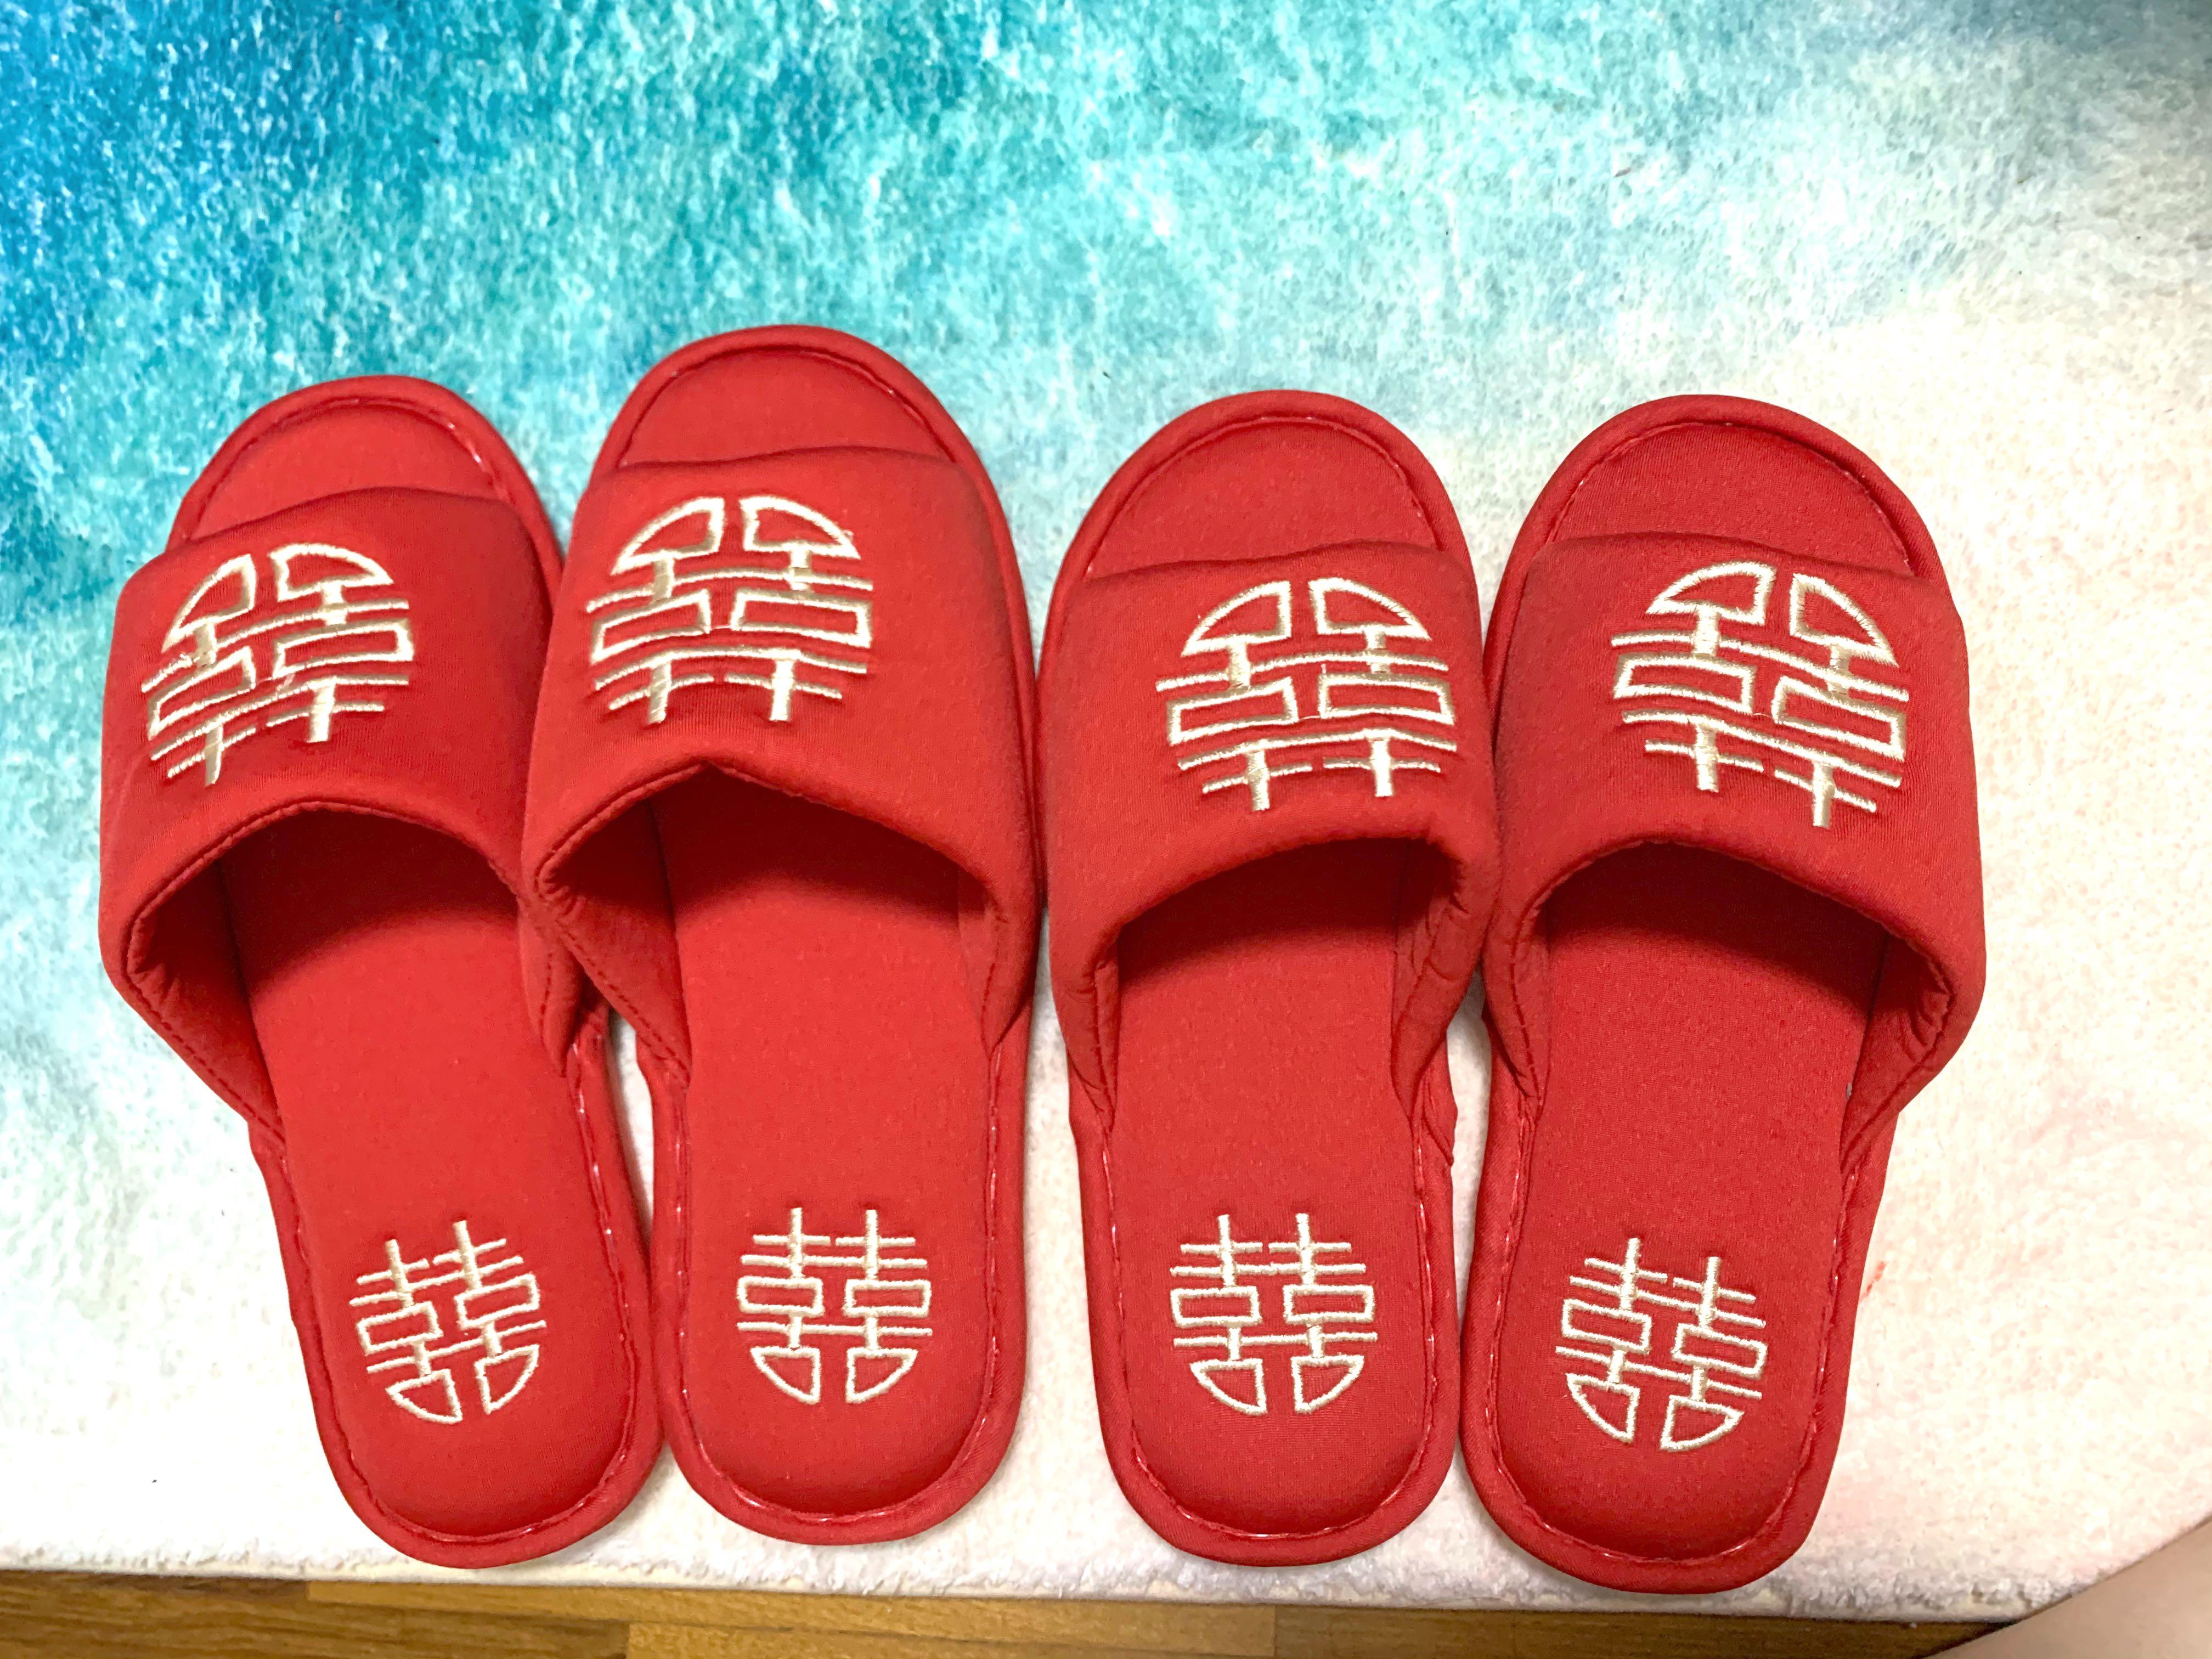 Chinese Wedding Bedroom Slippers Pair è¿å¤§ç¤¼å®åº Women S Fashion Footwear Flipflops And Slides On Carousell